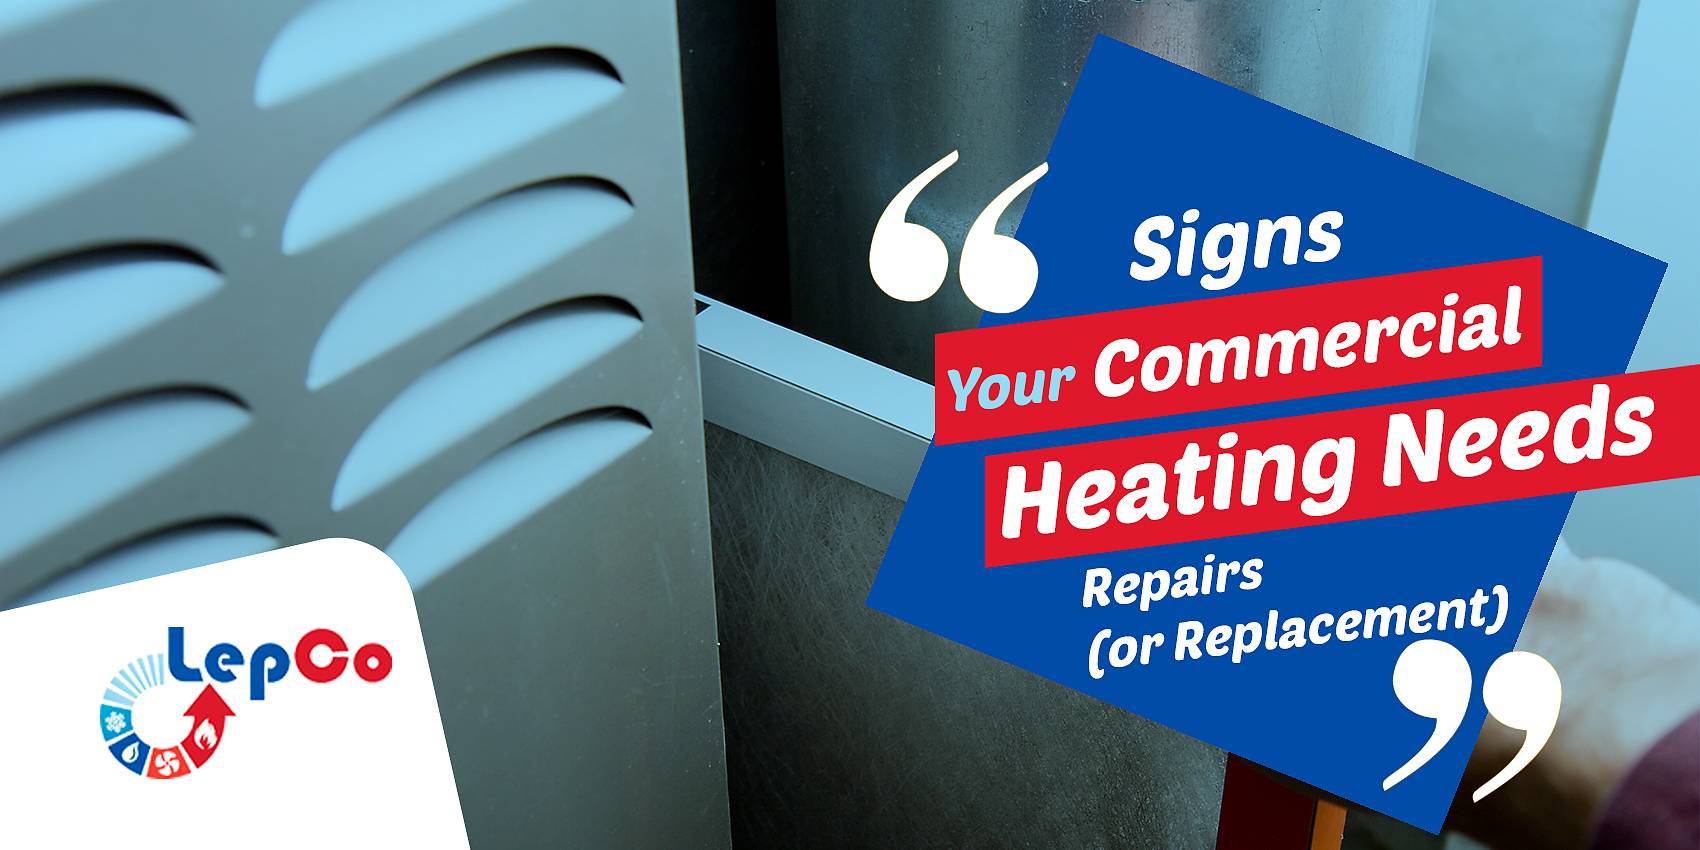 Lepco_Repairs (or-Replacement) for heating repairs